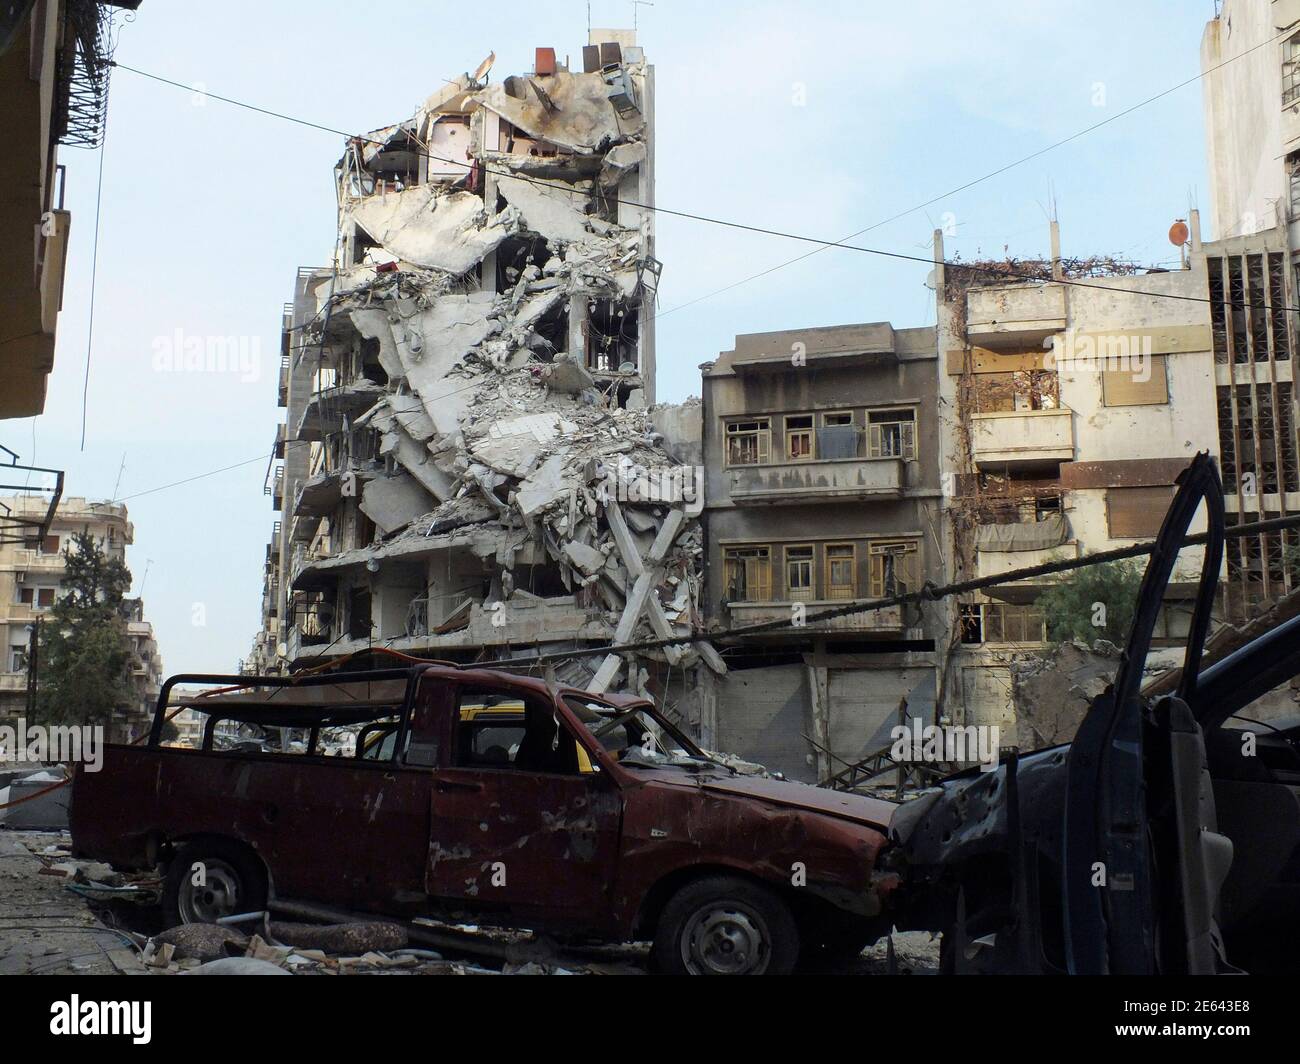 Damaged cars and buildings are seen in Juret al-Shayah in Homs November 1, 2012. Picture taken November 1, 2012.  REUTERS/Yazan Homsy (SYRIA - Tags: CONFLICT POLITICS) Stock Photo